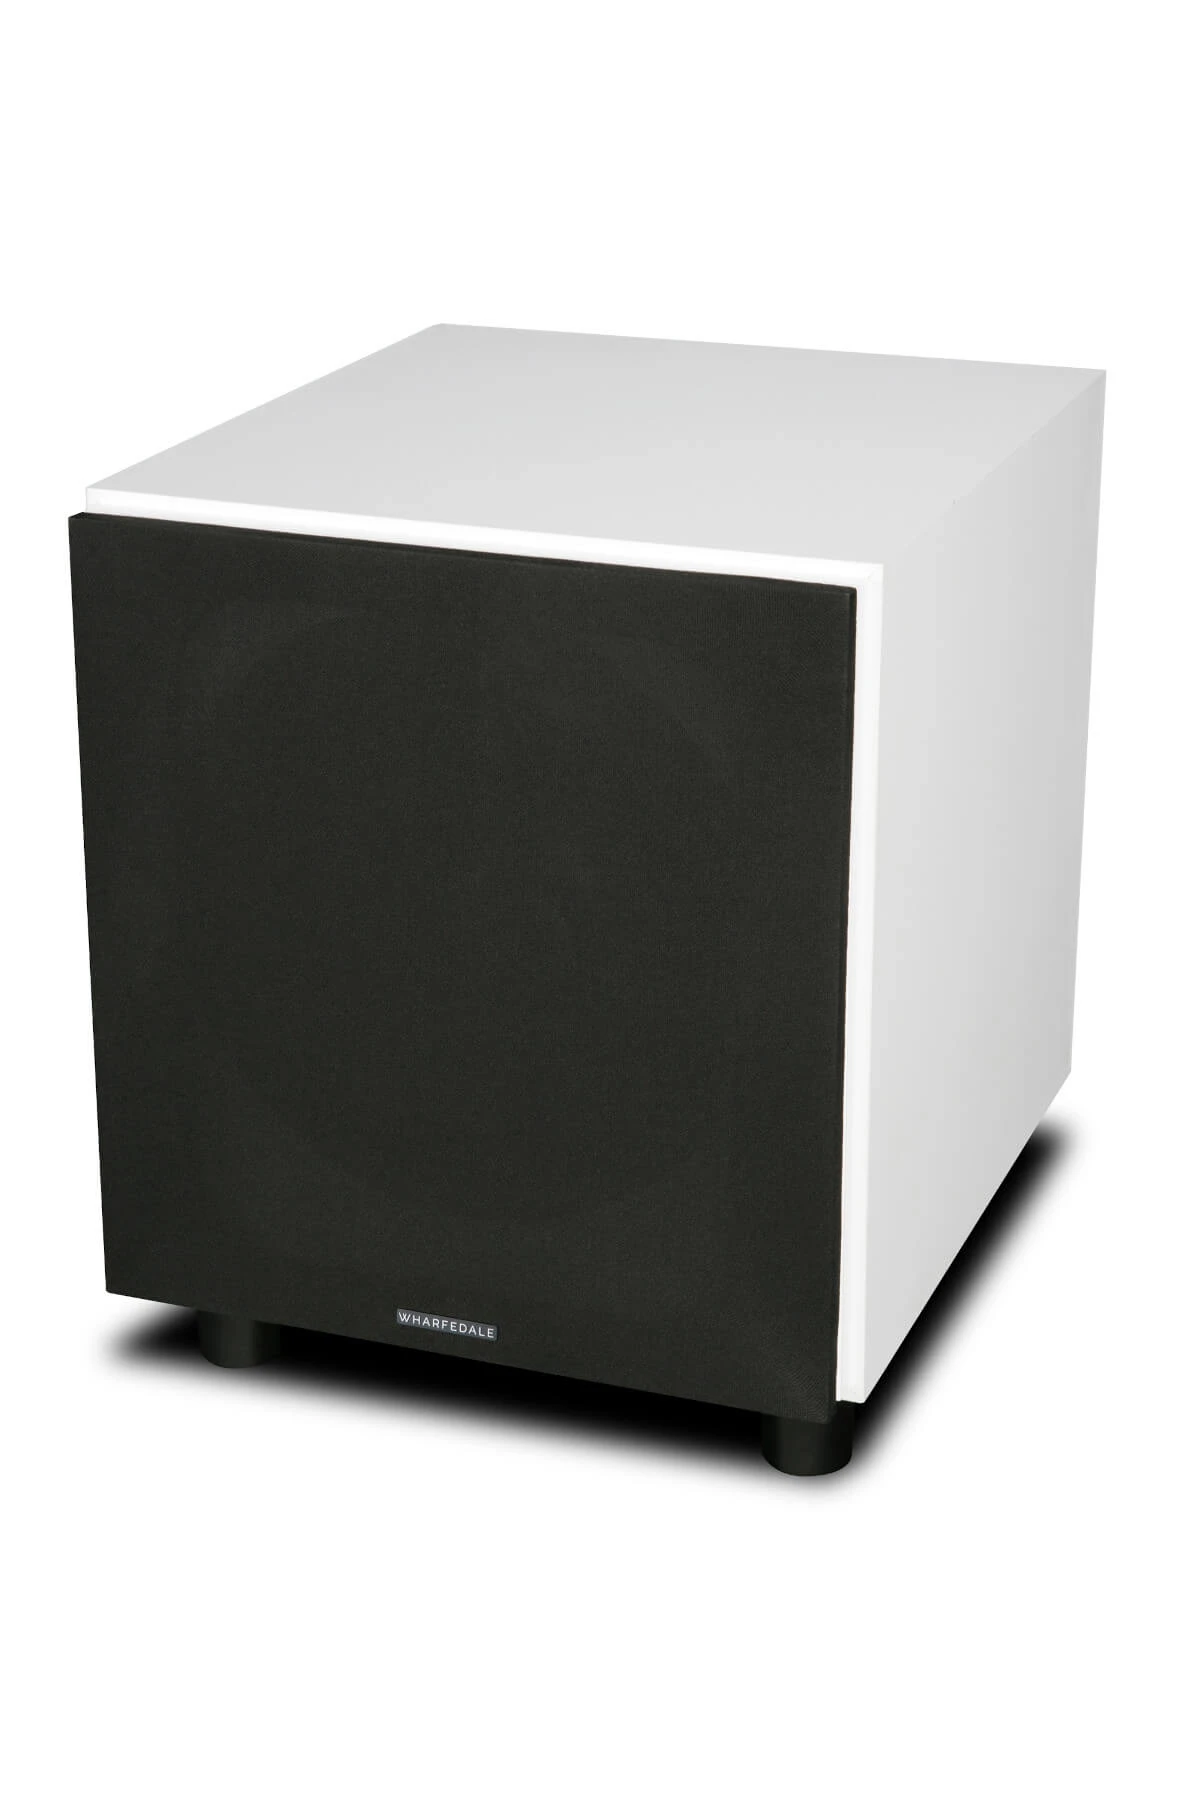 Wharfedale-SW-12-white-sanadex-front-with-grill